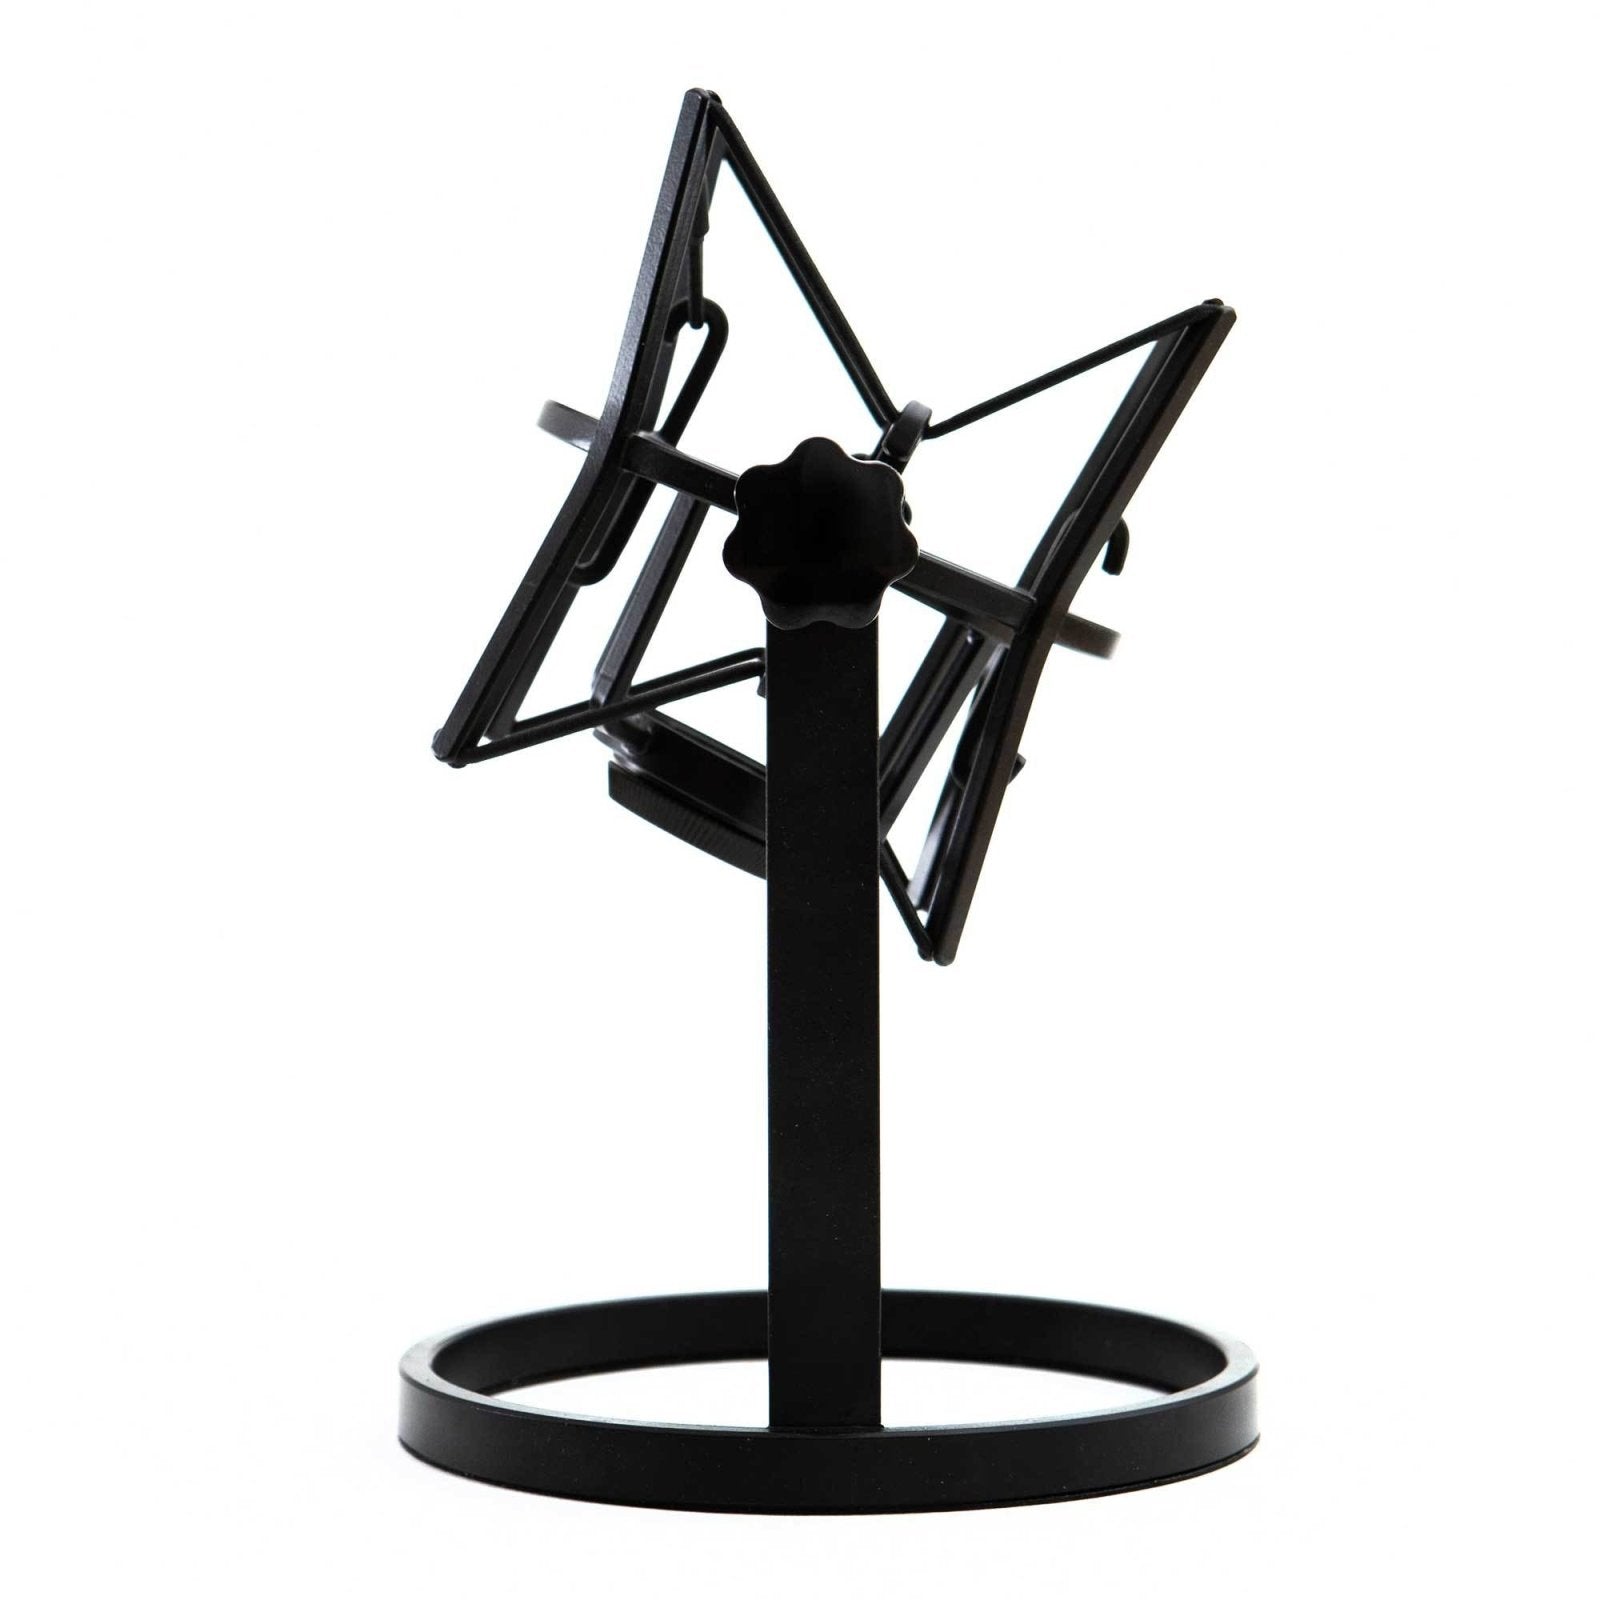 Desk Microphone Stand with Shock Mount - Editors Keys